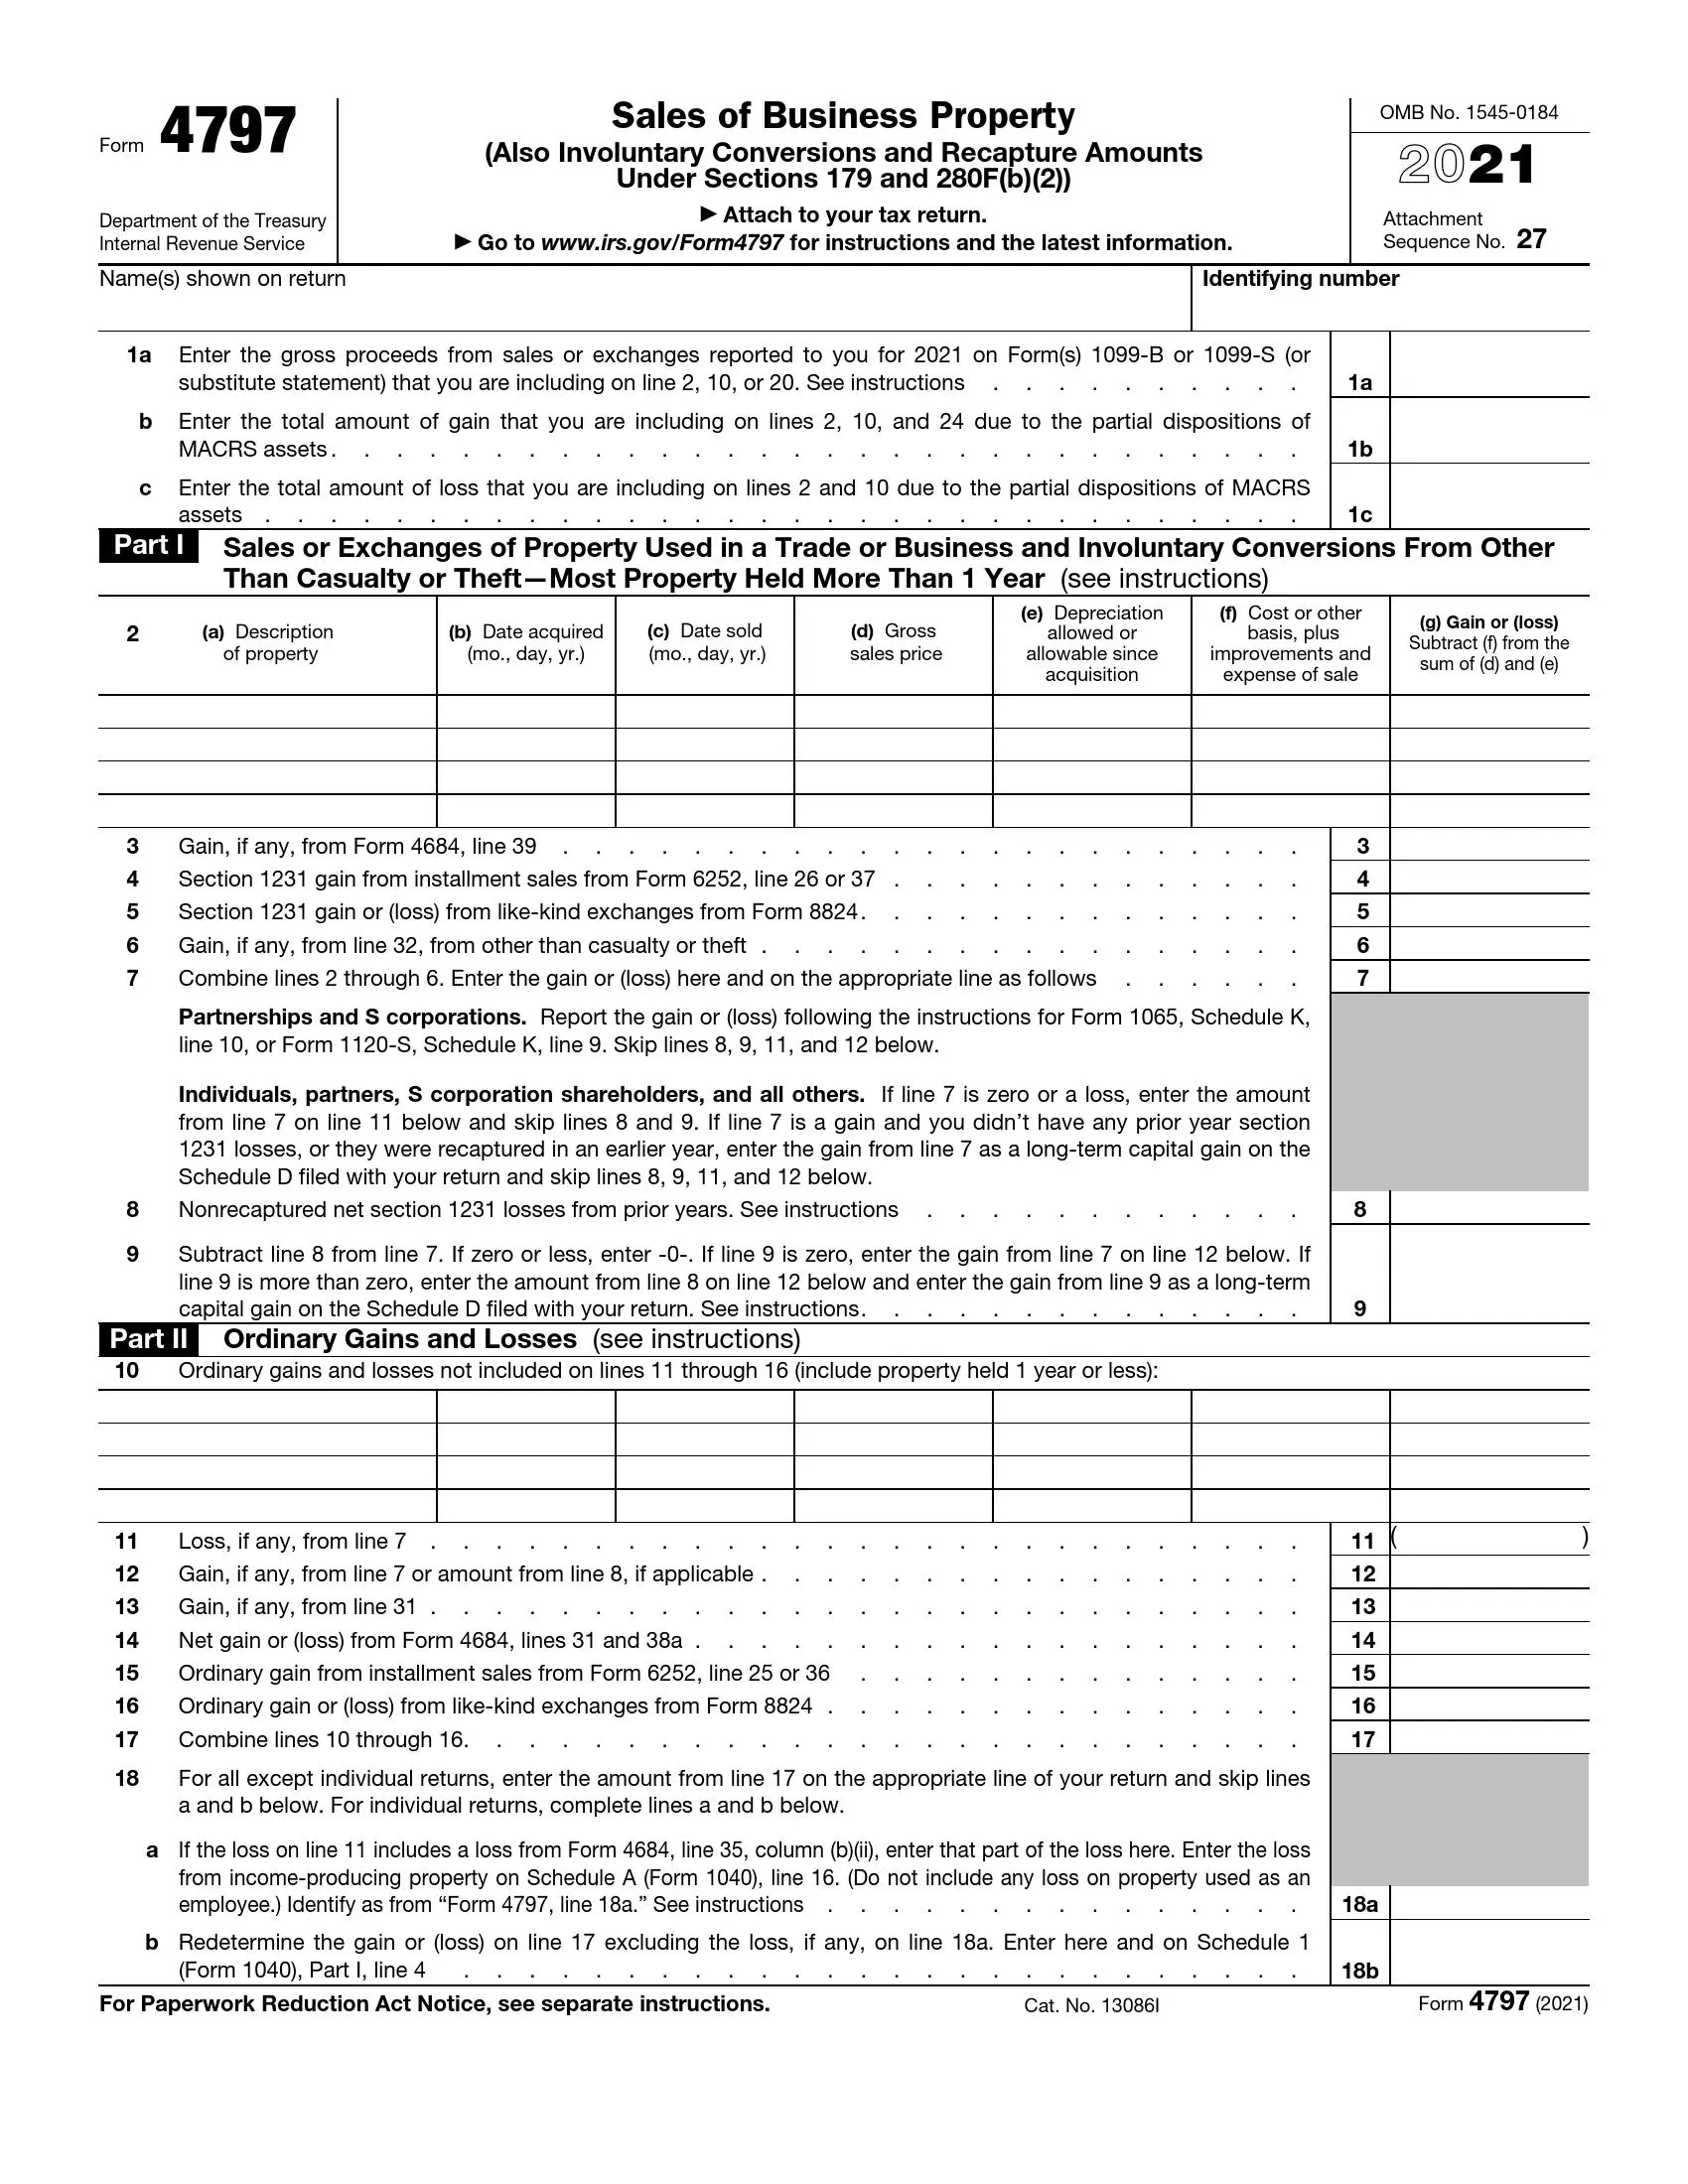 irs form 4797 2021 preview